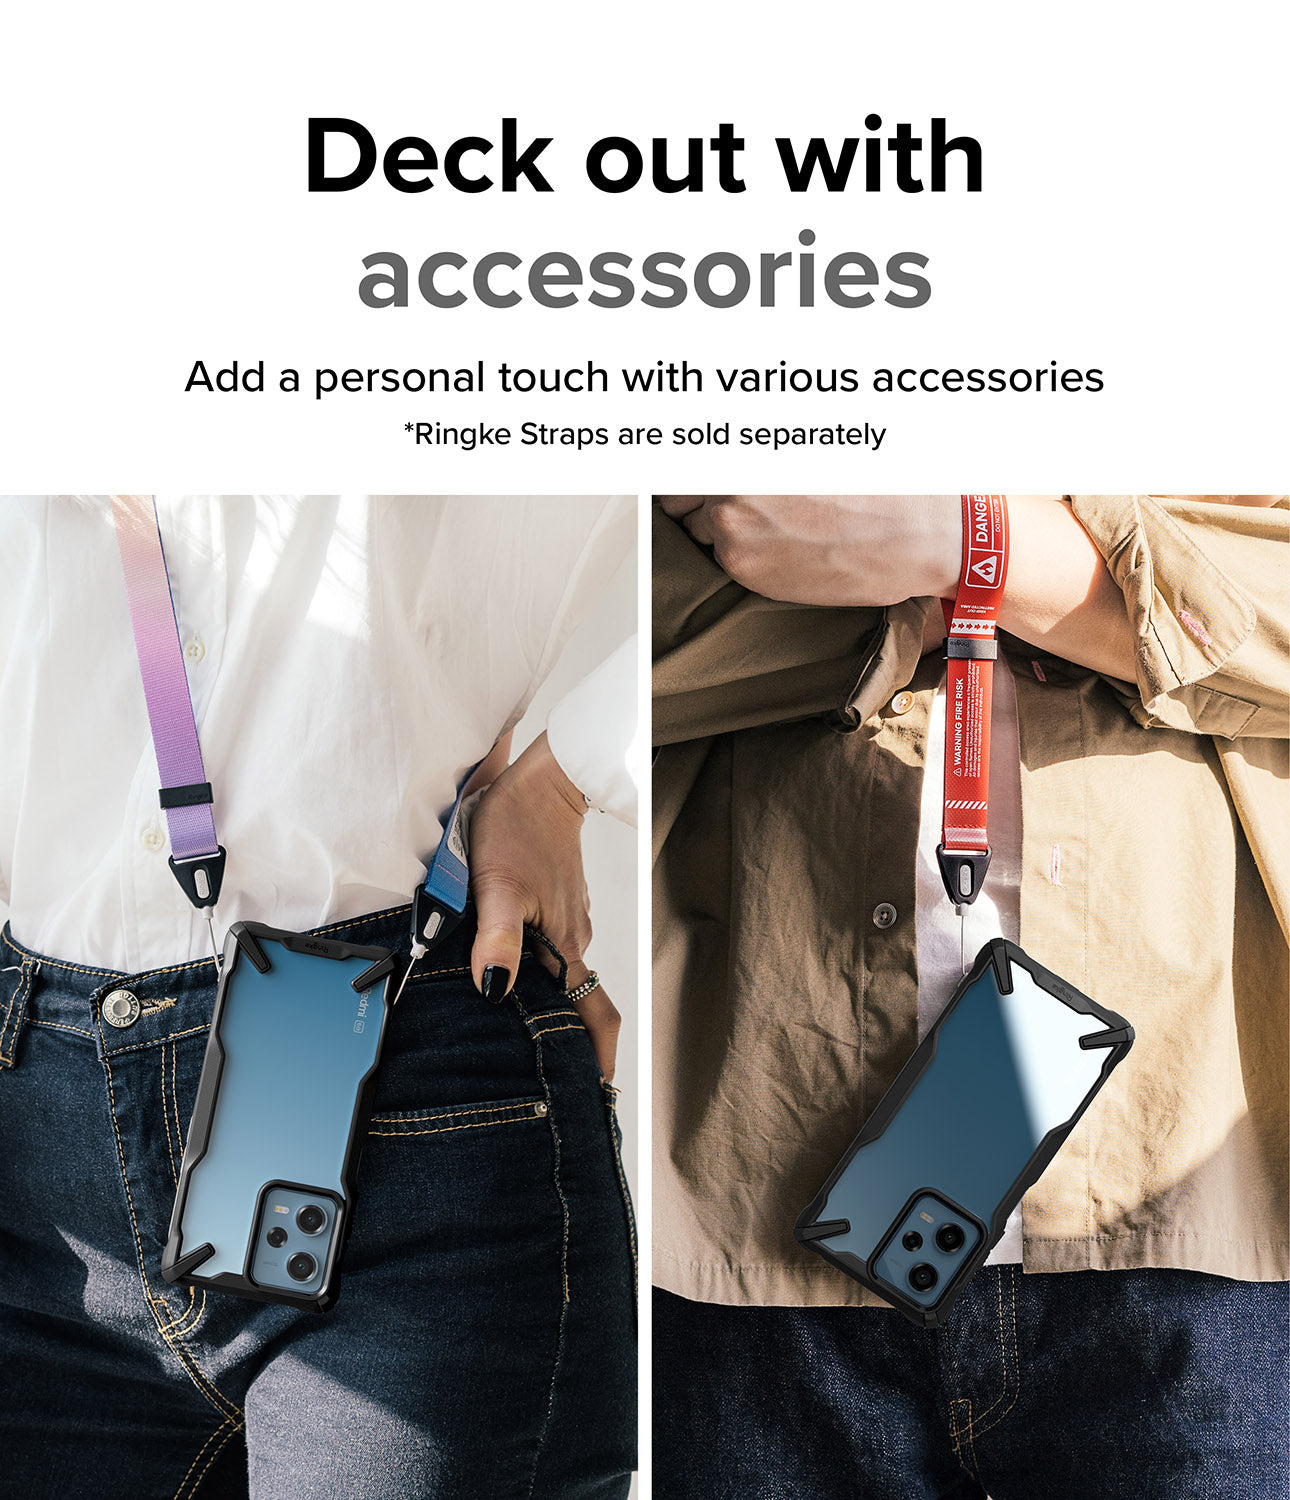 Deck out with accessories